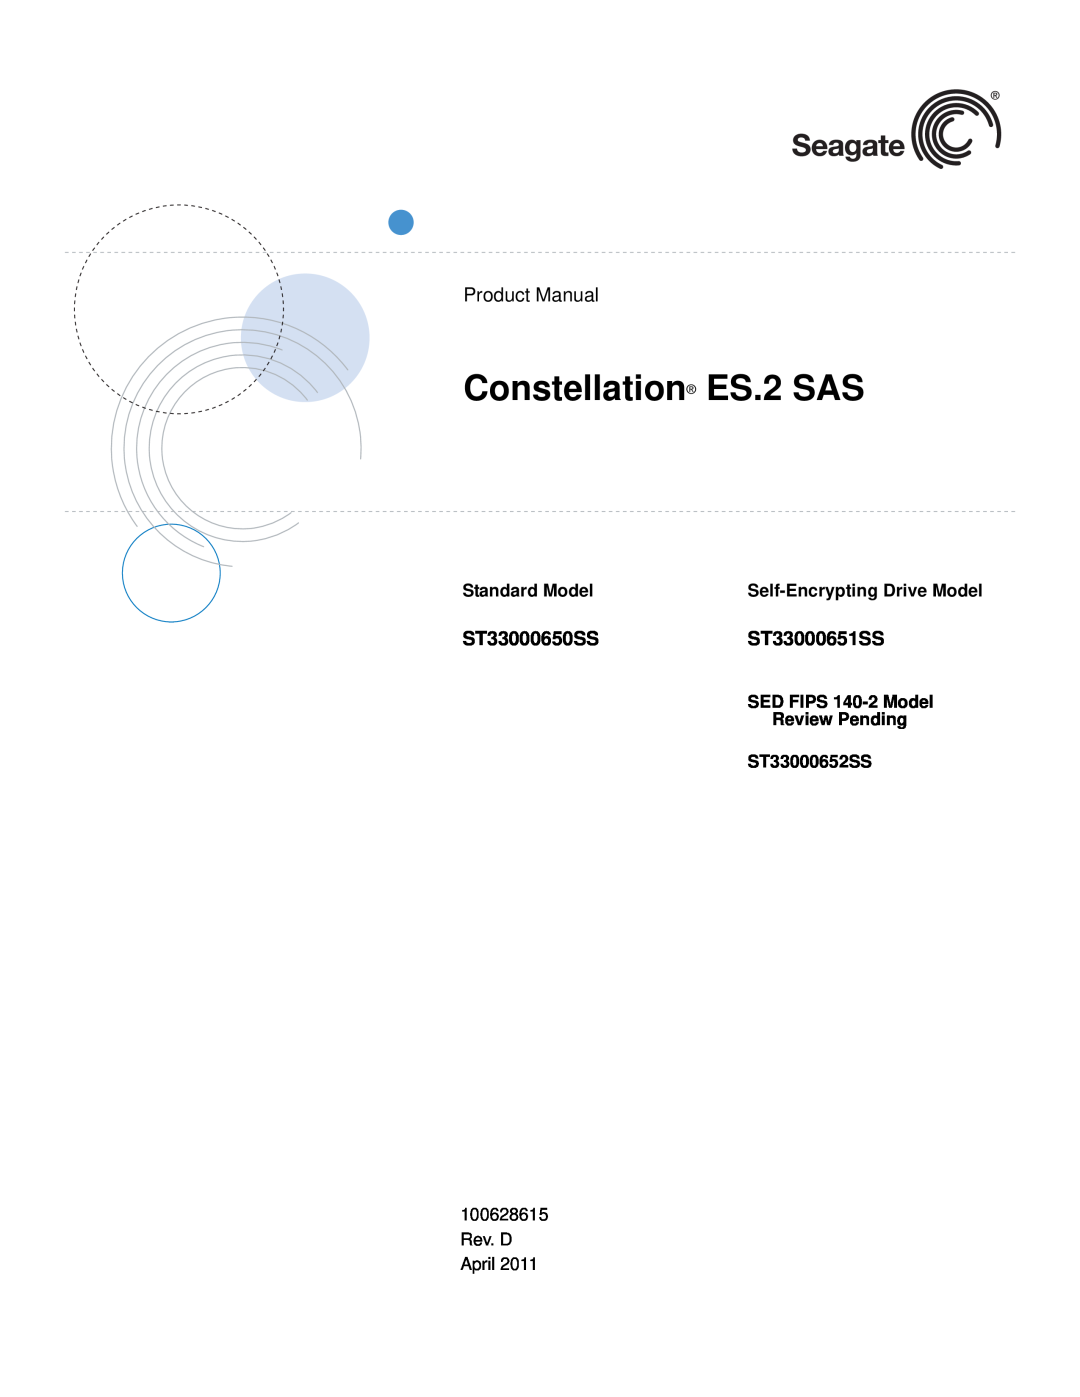 Seagate ST33000652SS manual ST33000650SSST33000651SS, Constellation ES.2 SAS, Product Manual, Standard Model 